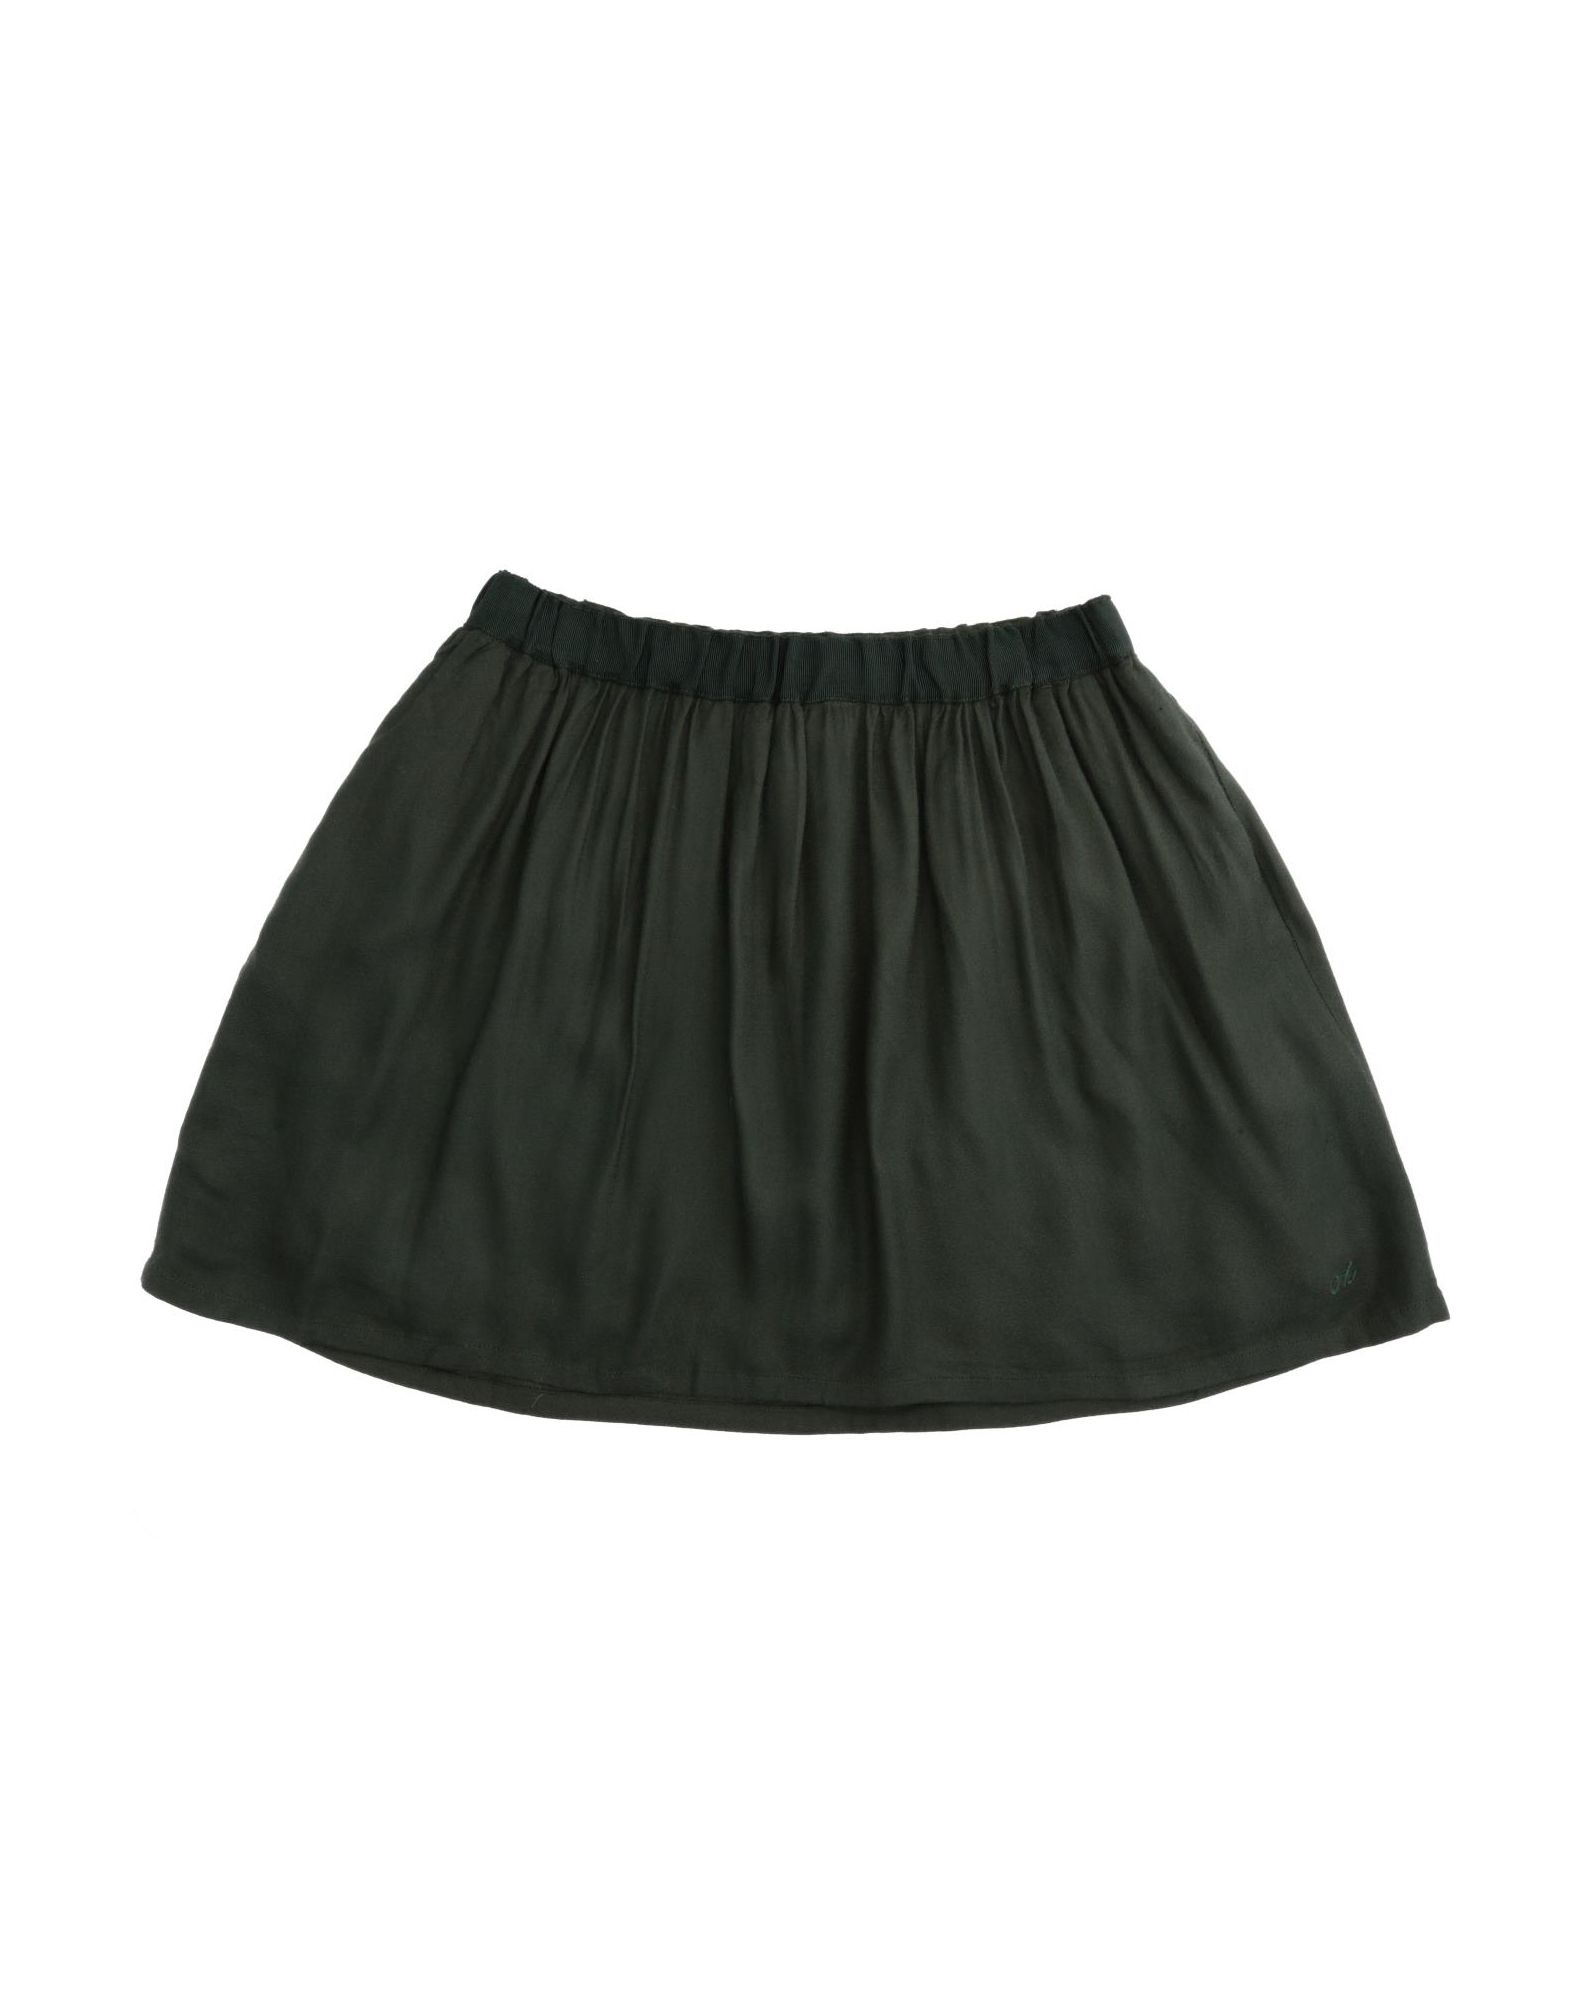 American Outfitters Kids' Skirts In Dark Green